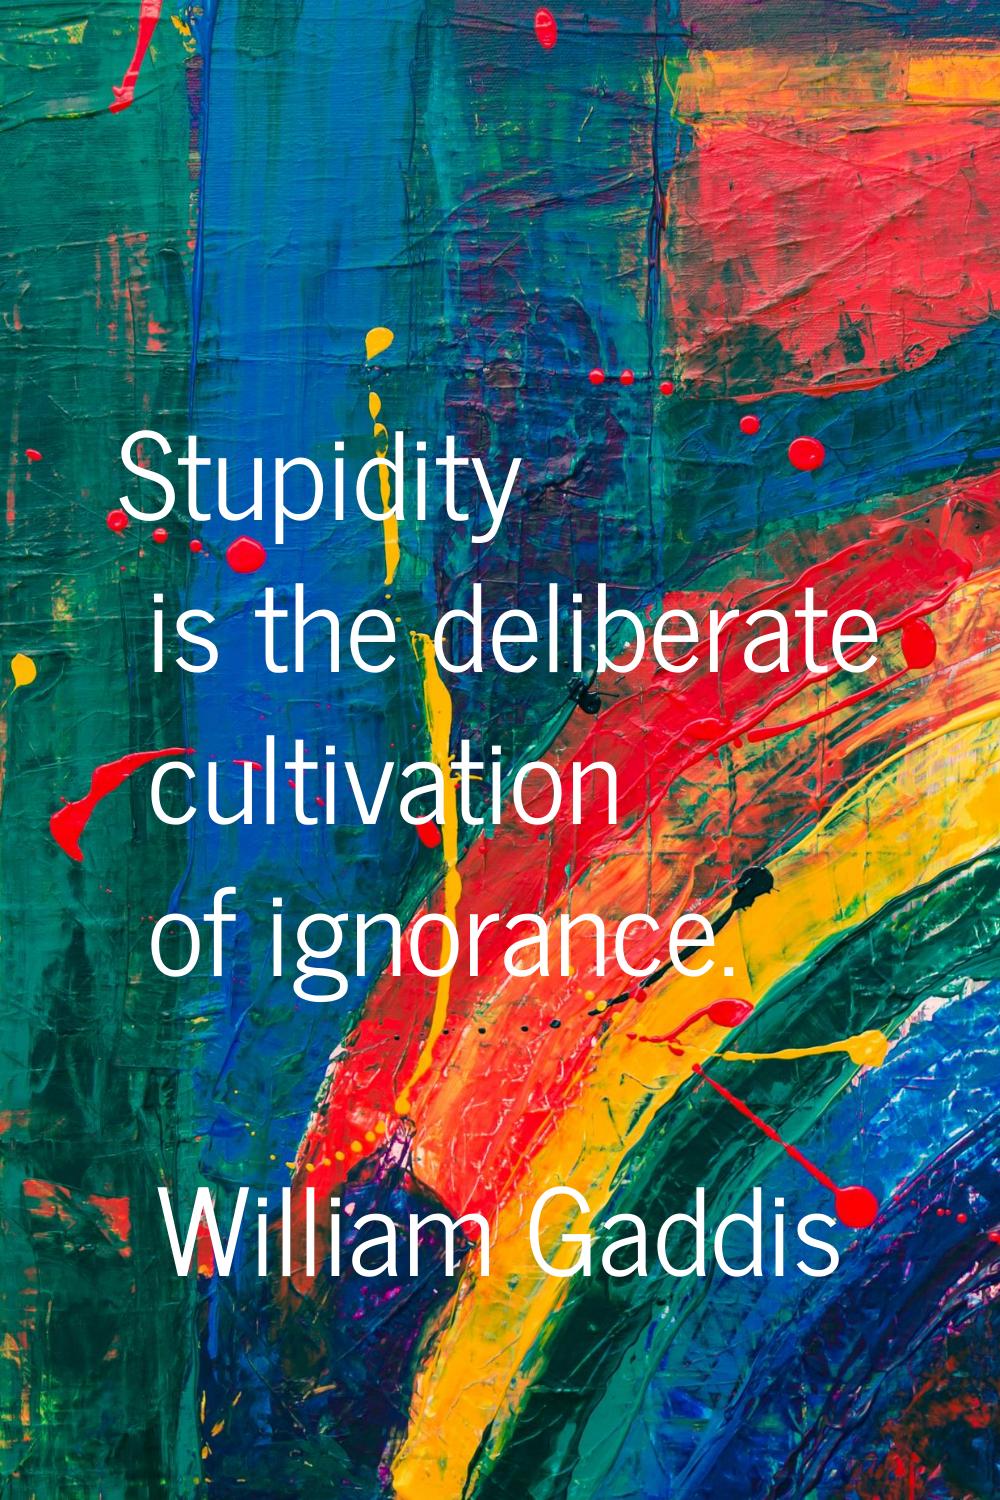 Stupidity is the deliberate cultivation of ignorance.